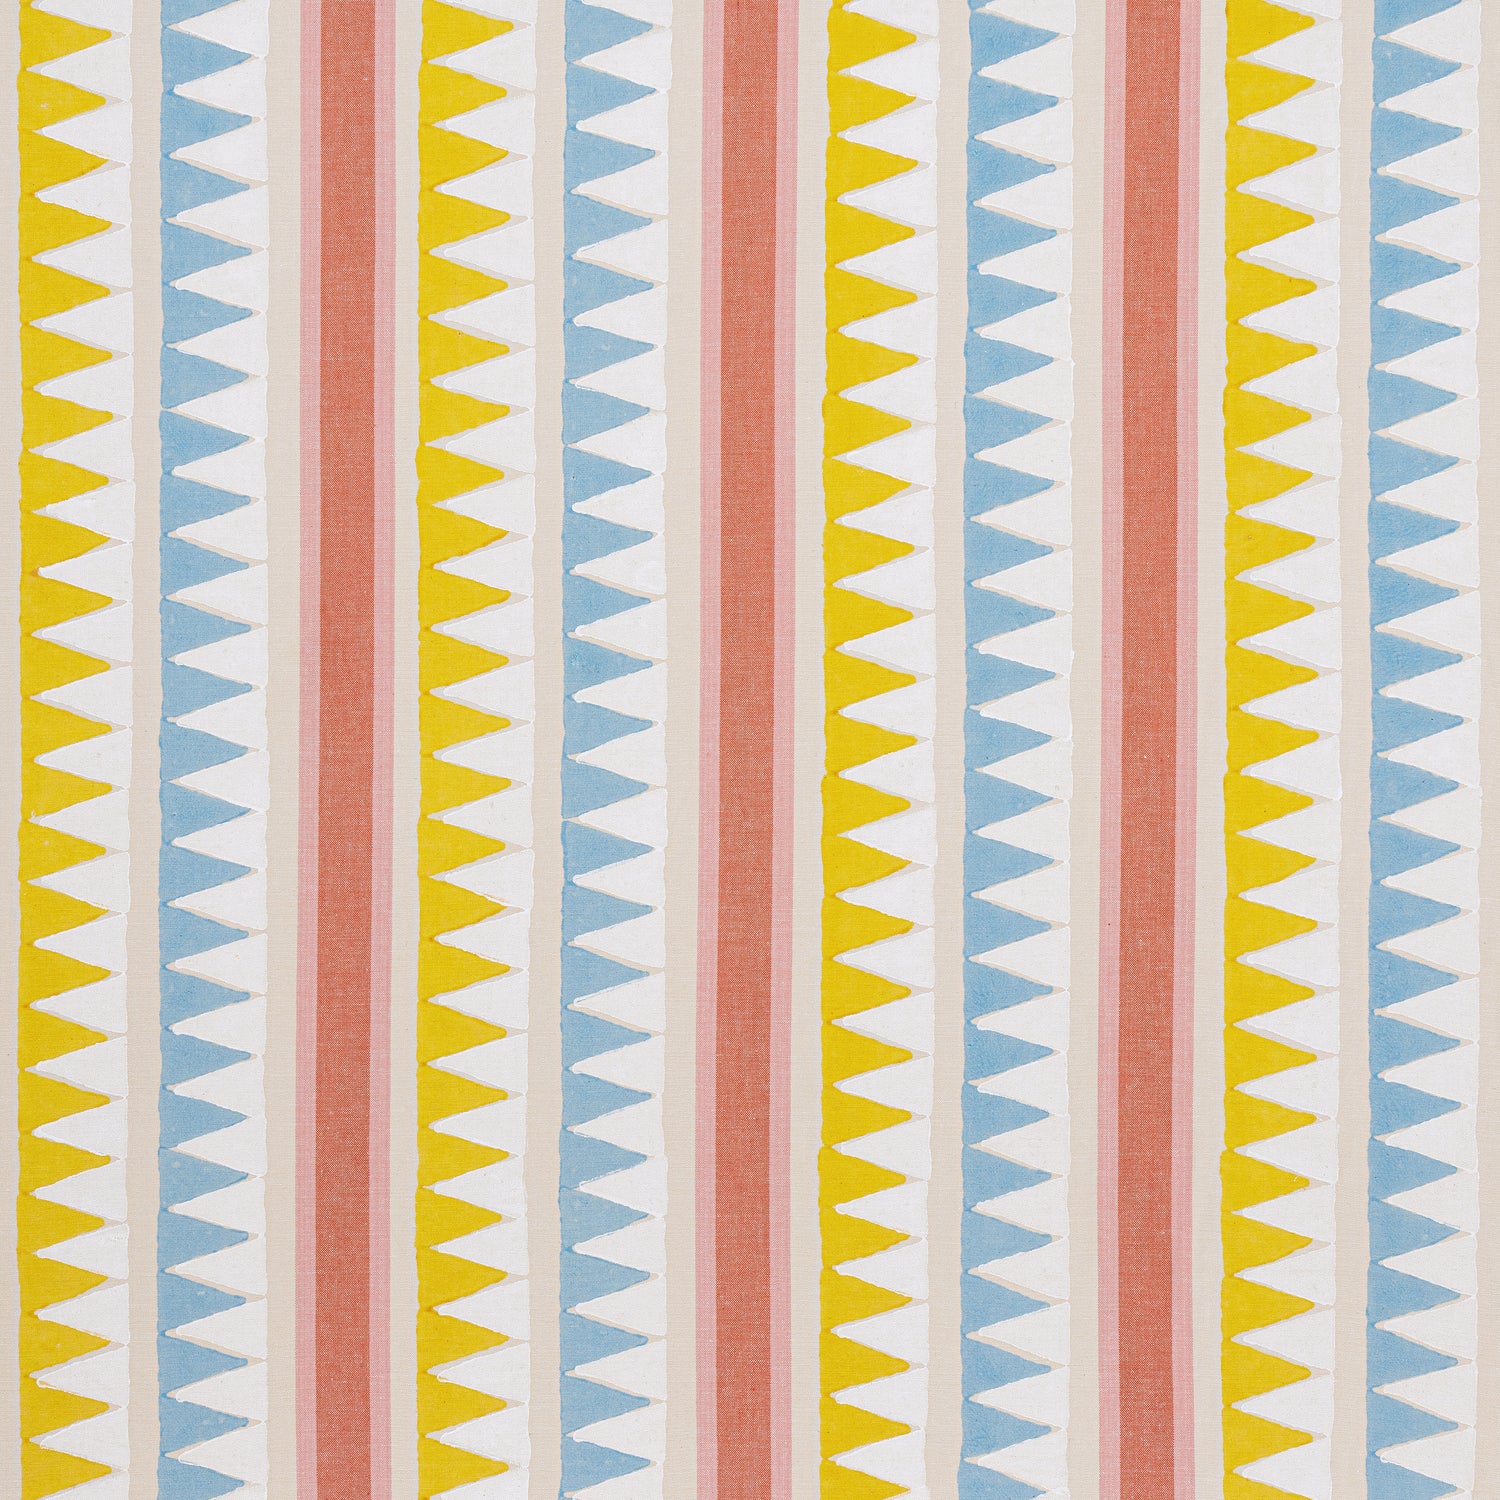 Lomita Stripe fabric in coral and yellow color - pattern number F916234 - by Thibaut in the Kismet collection